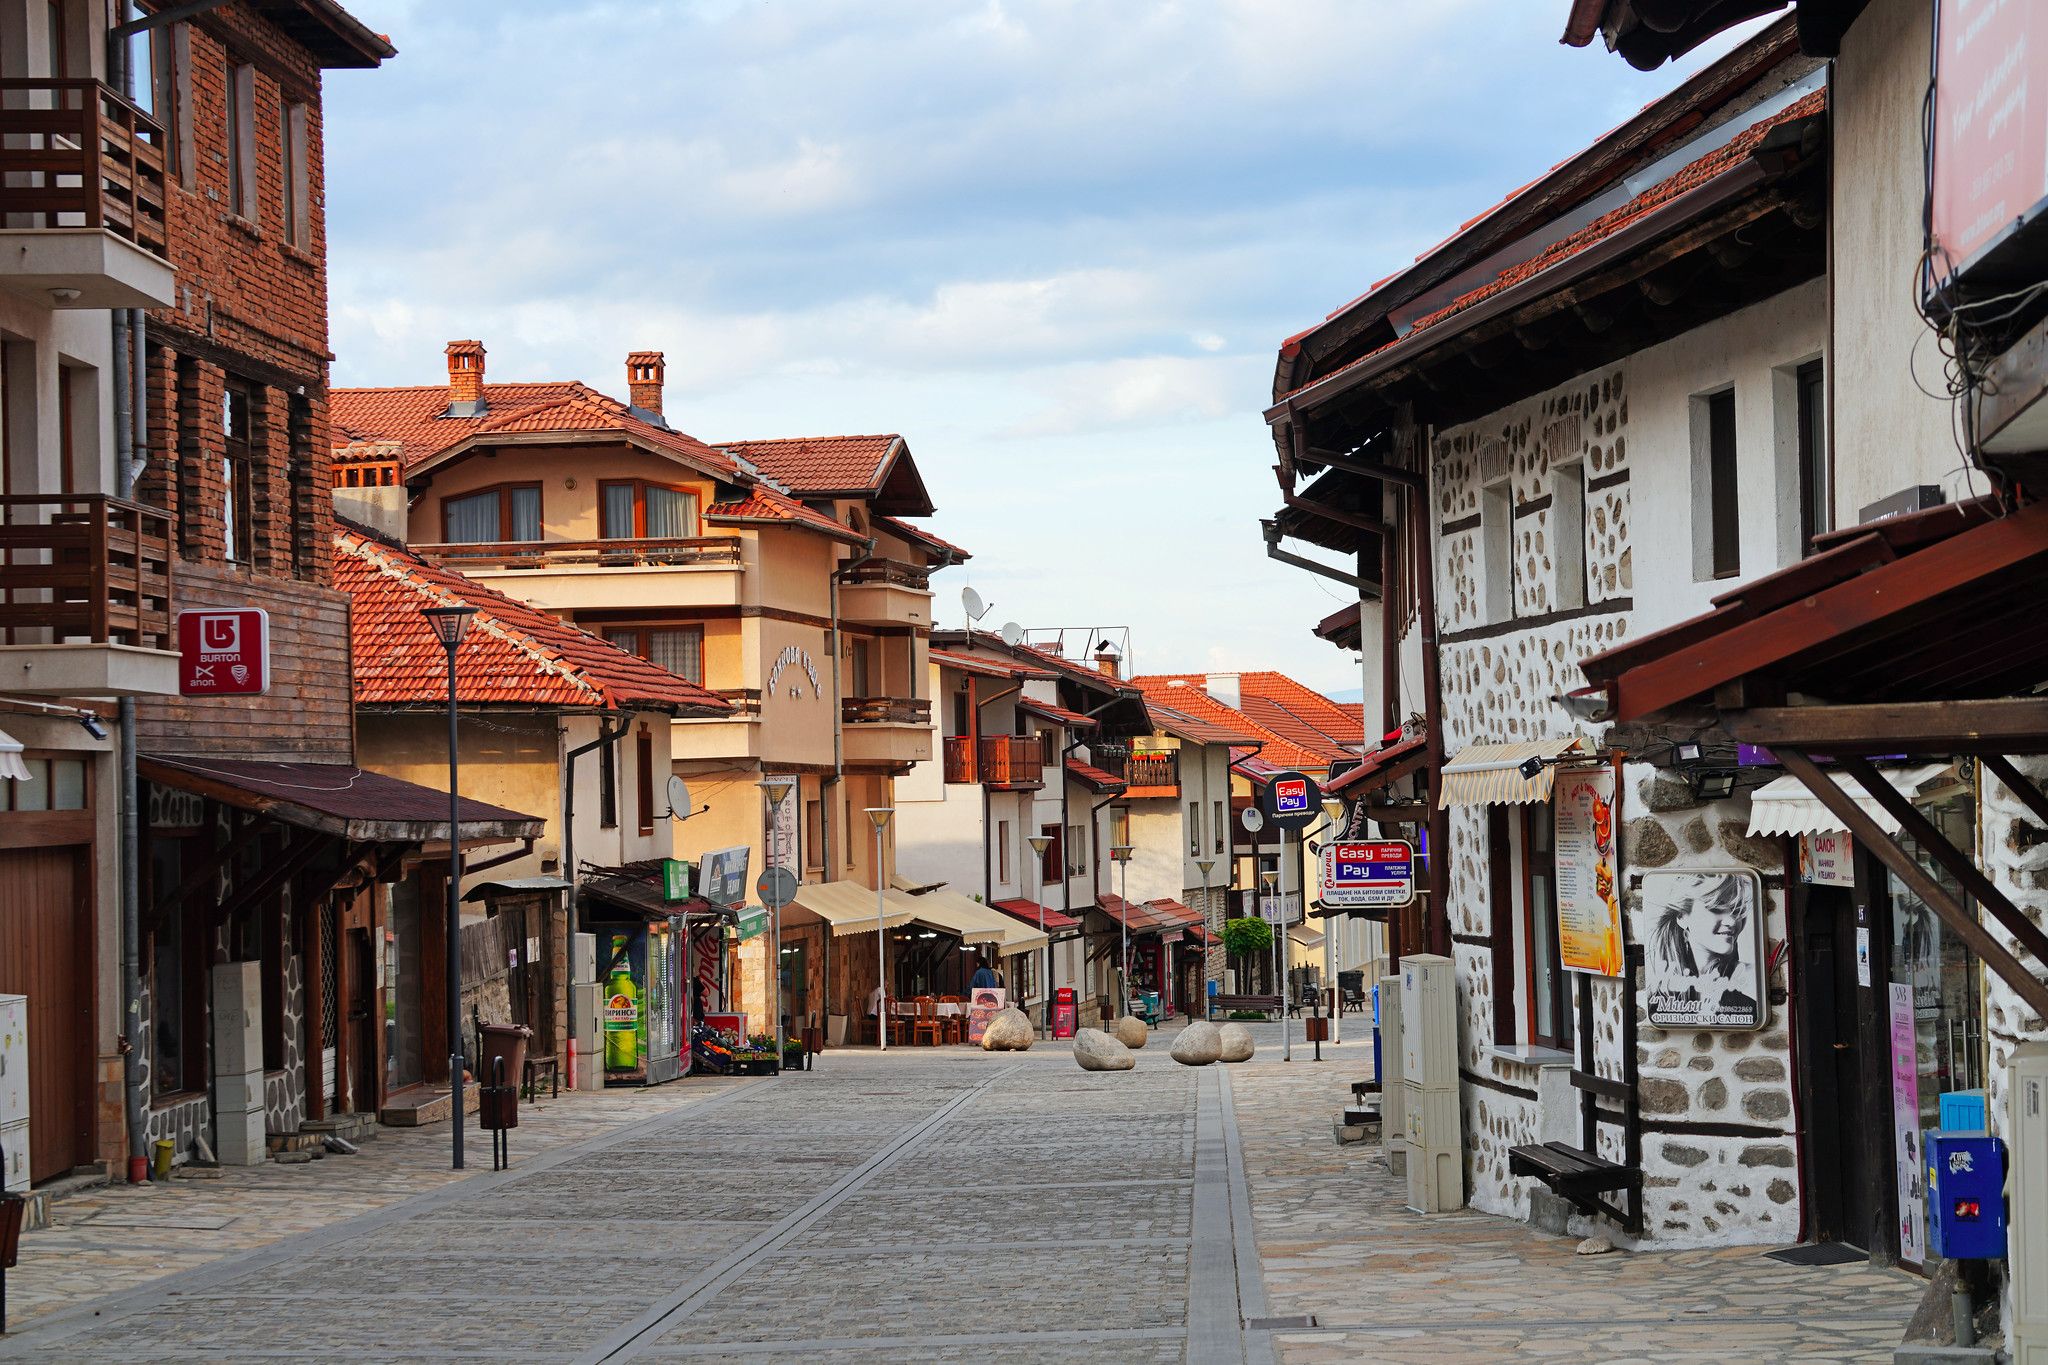 Bansko Town Centre with its stone buildings and cobbled streets